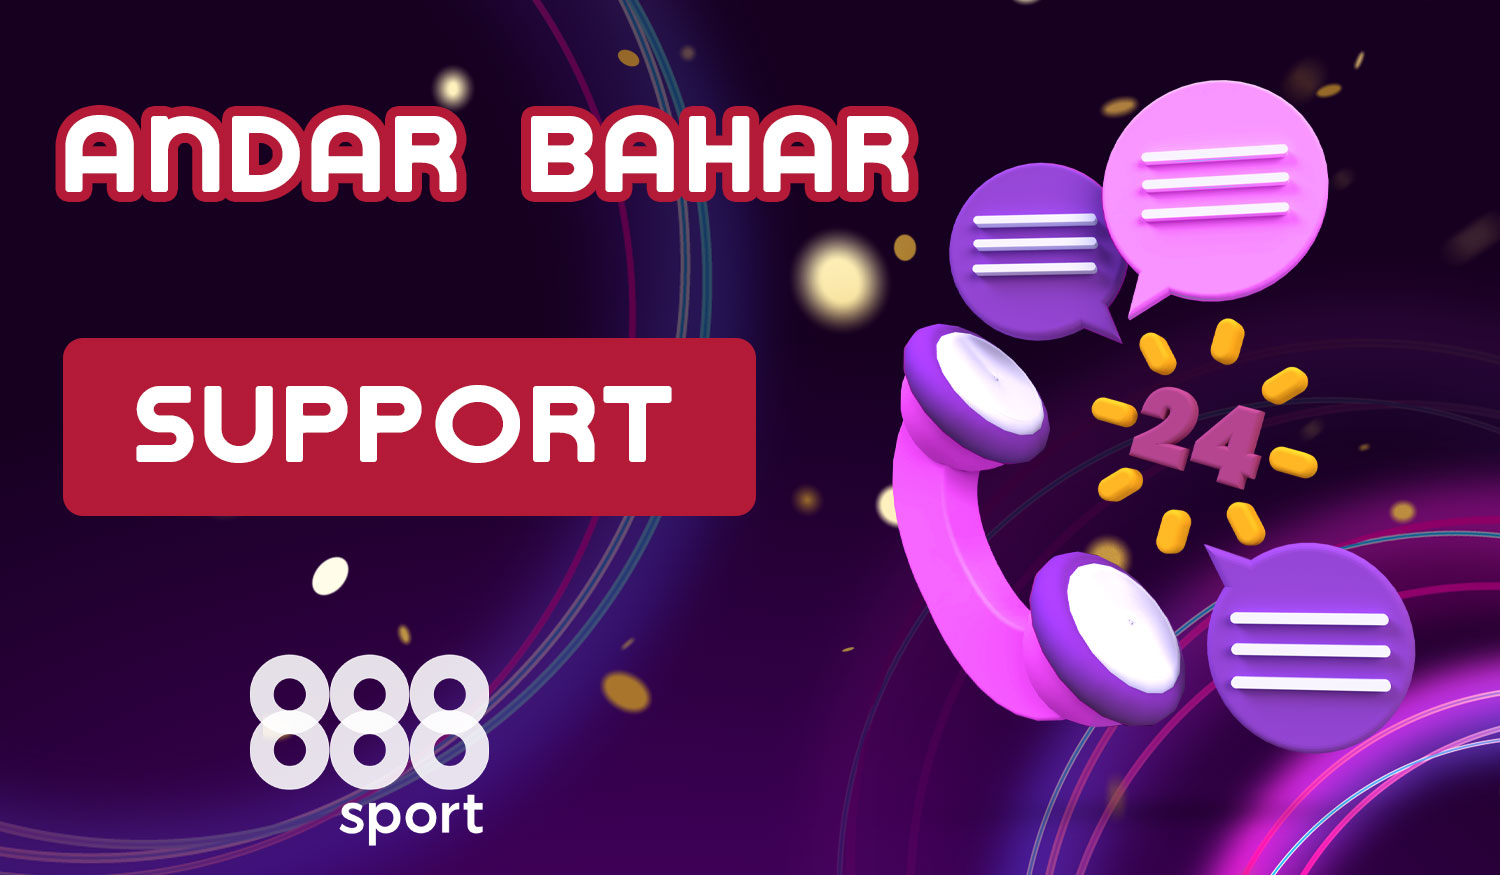 The customer support service of 888Sport operates 24 hours a day, 7 days a week, providing prompt assistance whenever needed to players from India playing Andar Bahar